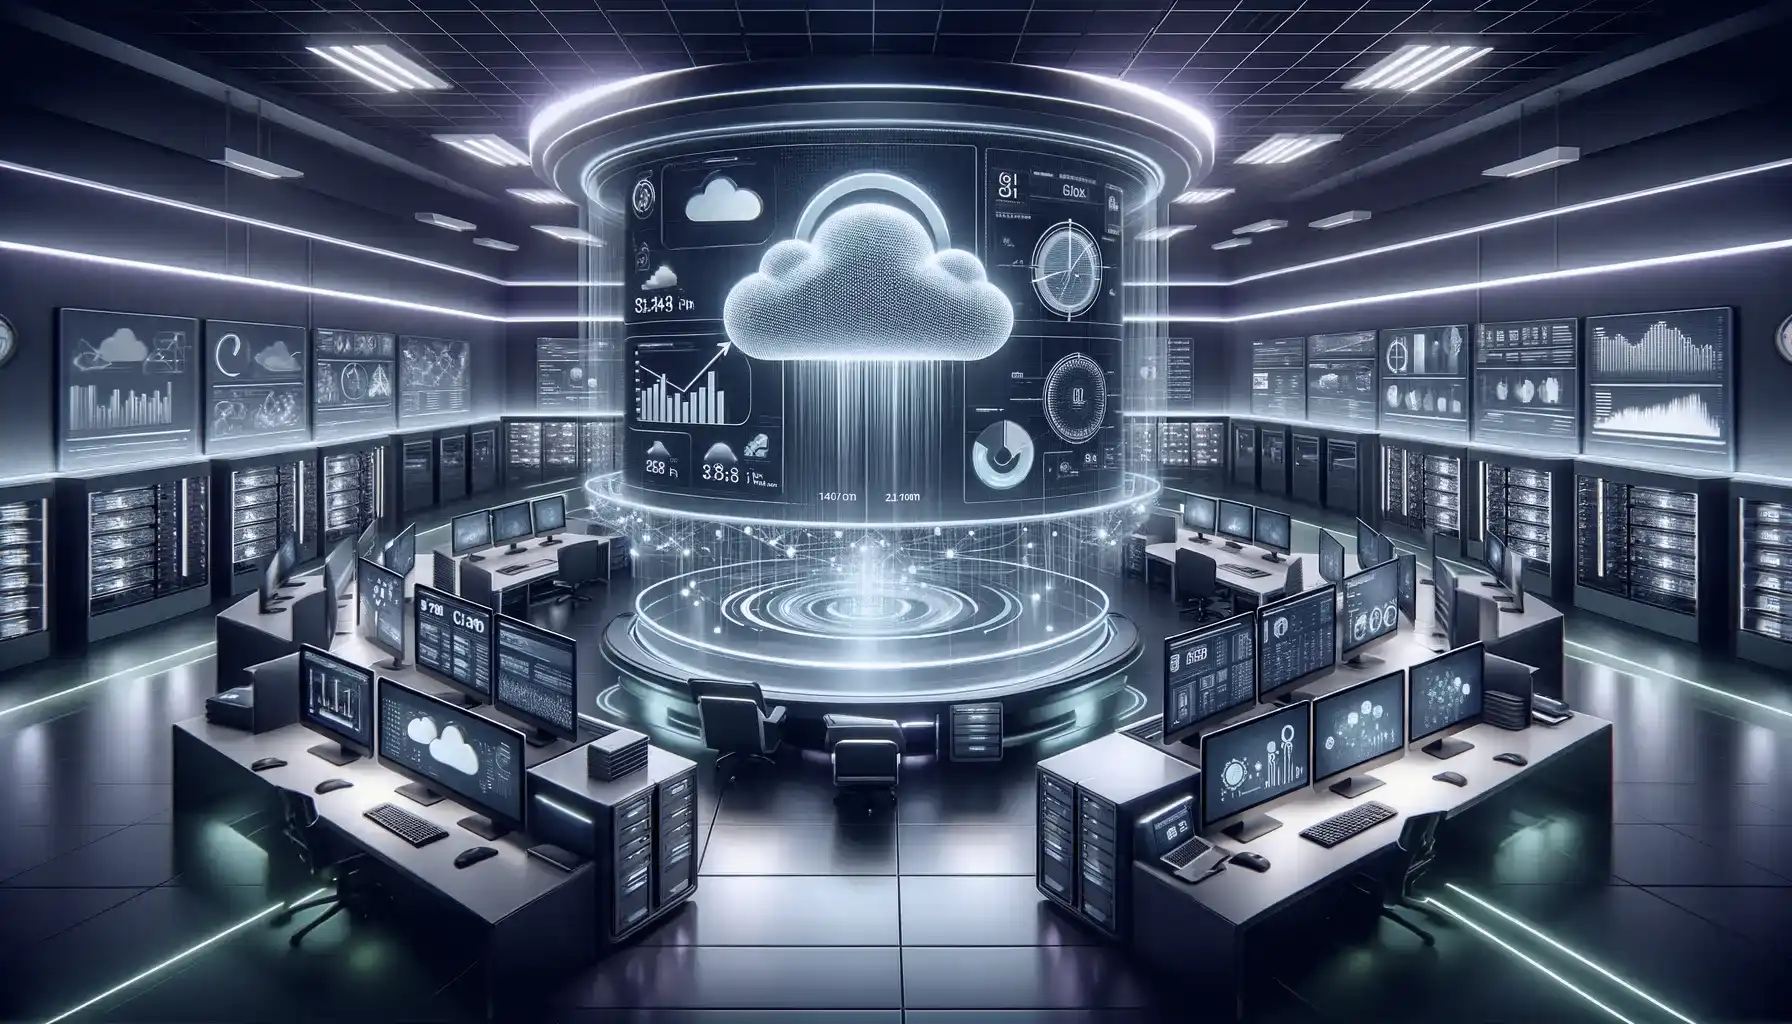 This image depicts a futuristic office setting, illustrating how cloud management services can reduce business operating costs. The scene features sleek, high-tech computers and servers, all interconnected within a centralized cloud network. A digital dashboard is prominently displayed, showcasing graphs and statistics that emphasize cost savings and efficiency improvements. The office is enveloped in a vibrant atmosphere, highlighted by soft green and purple neon lights, creating a visually striking, technological ambiance. The absence of people in the scene underscores the automated and efficient nature of cloud management systems.